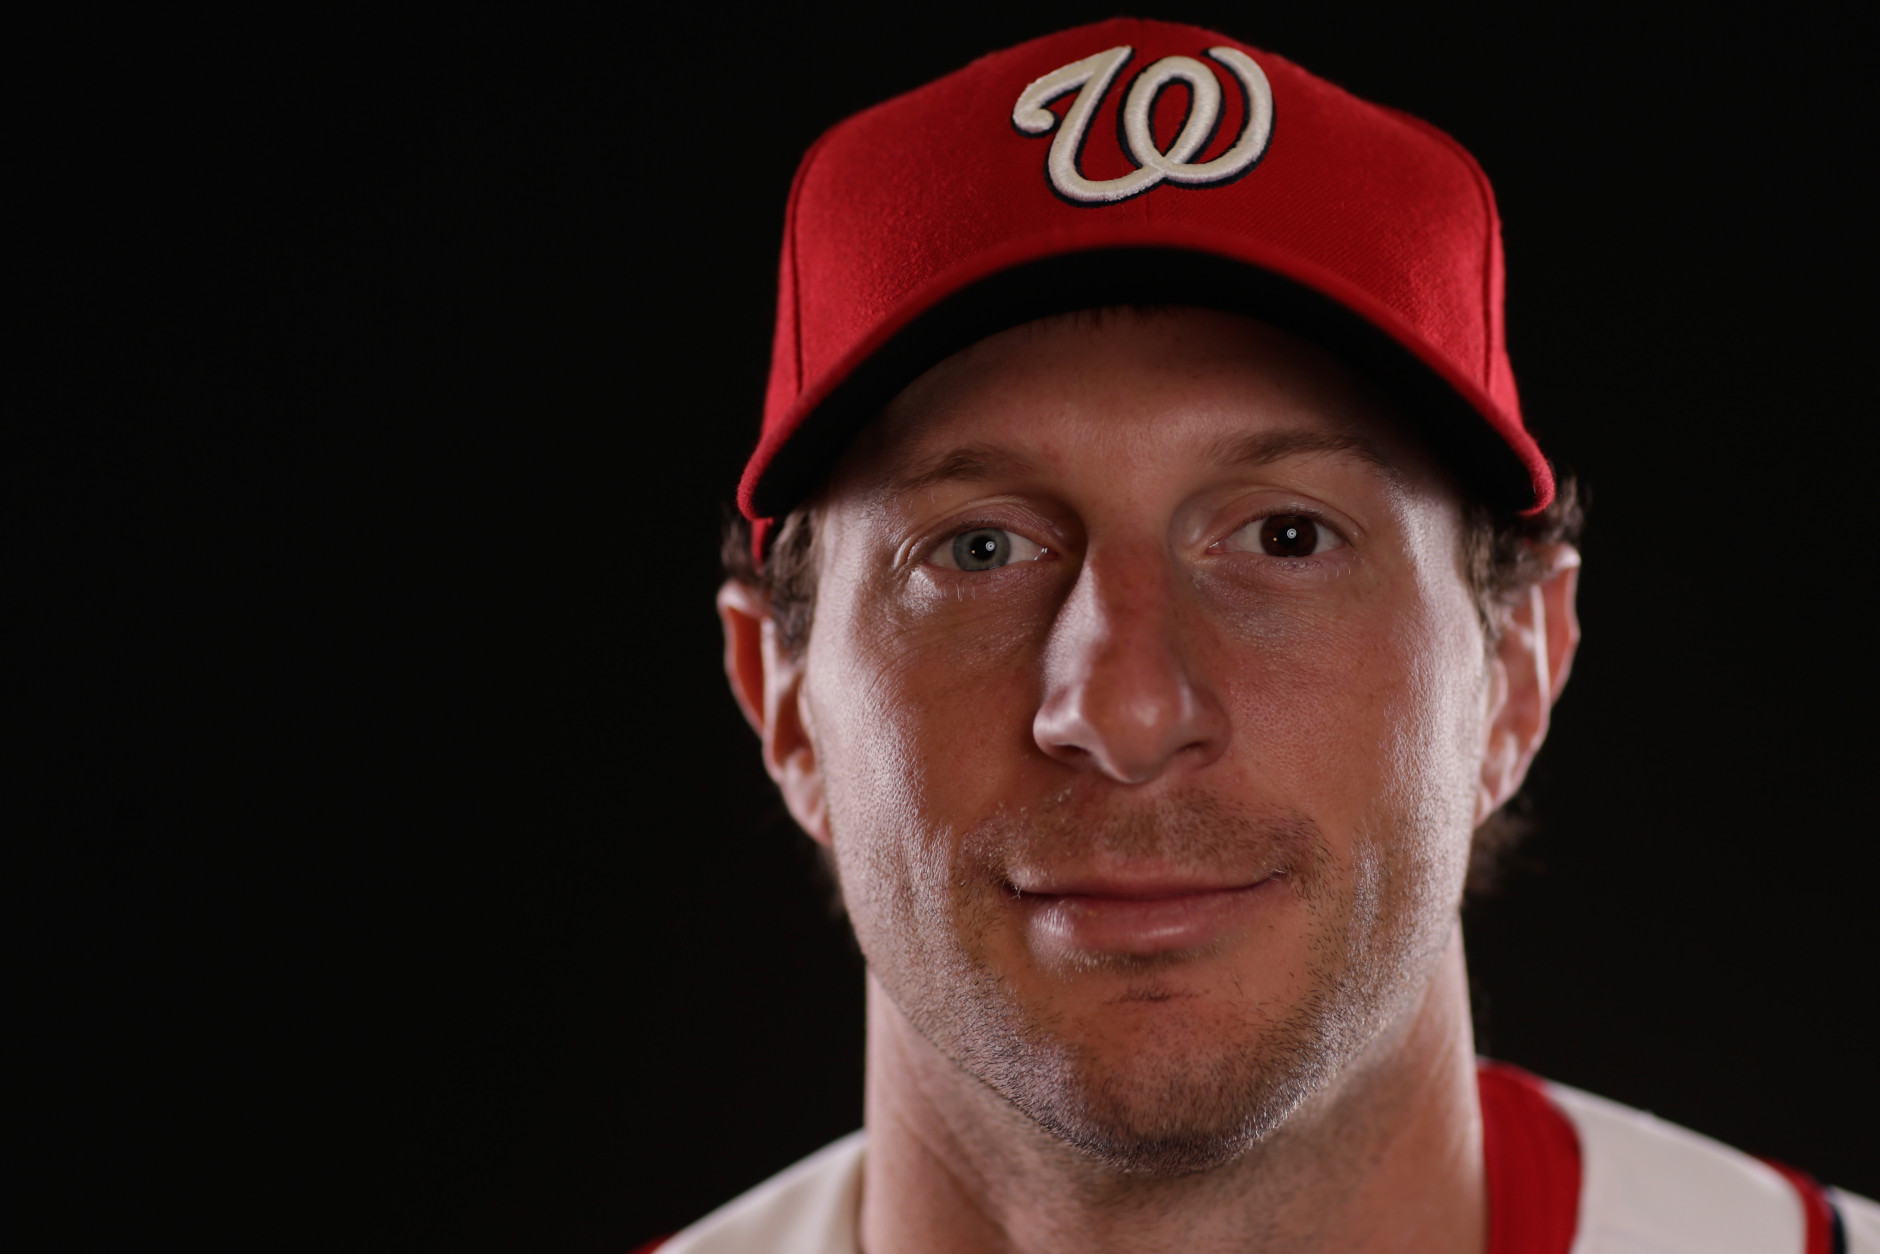 VIERA, FL - MARCH 01:  Max Scherzer #31 of the Washington Nationals poses for a portrait during photo day at Space Coast Stadium on March 1, 2015 in Viera, Florida.  (Photo by Chris Trotman/Getty Images)